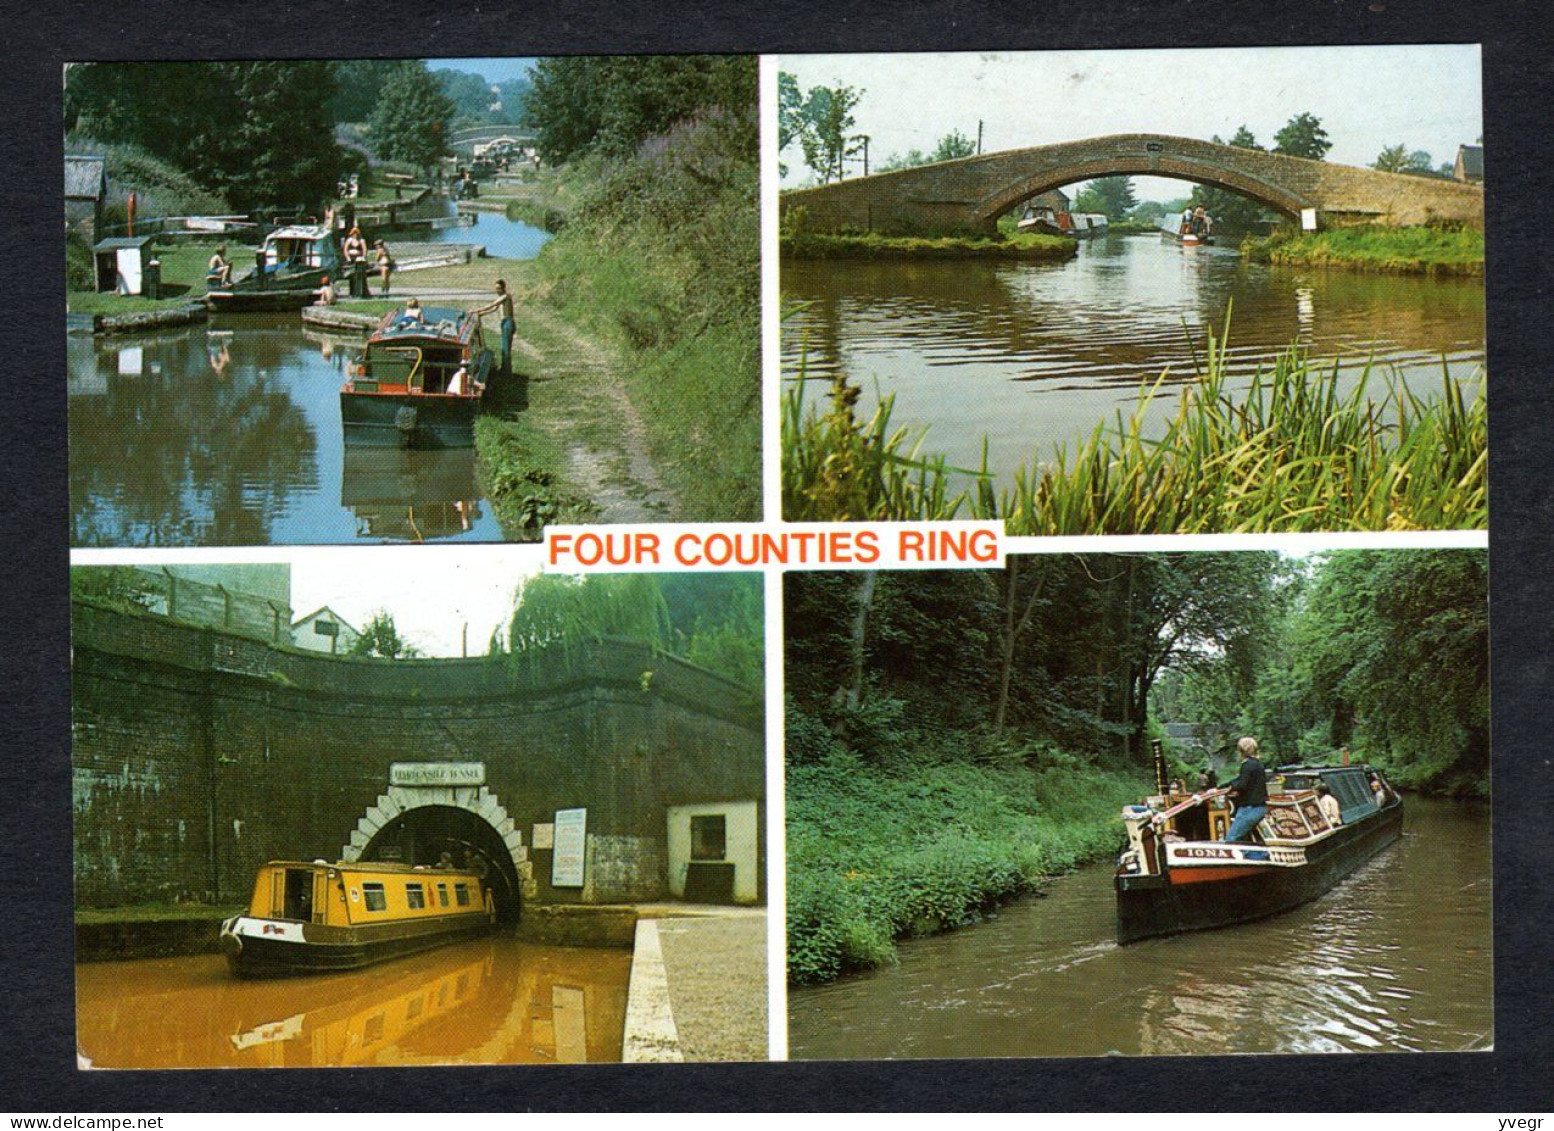 Angleterre - FOUR COUNTIES RING- Multi Vues -Audlem Locks, Great Haywood Junction, Harecastle Tunnel, Horseboat Union - Hertfordshire